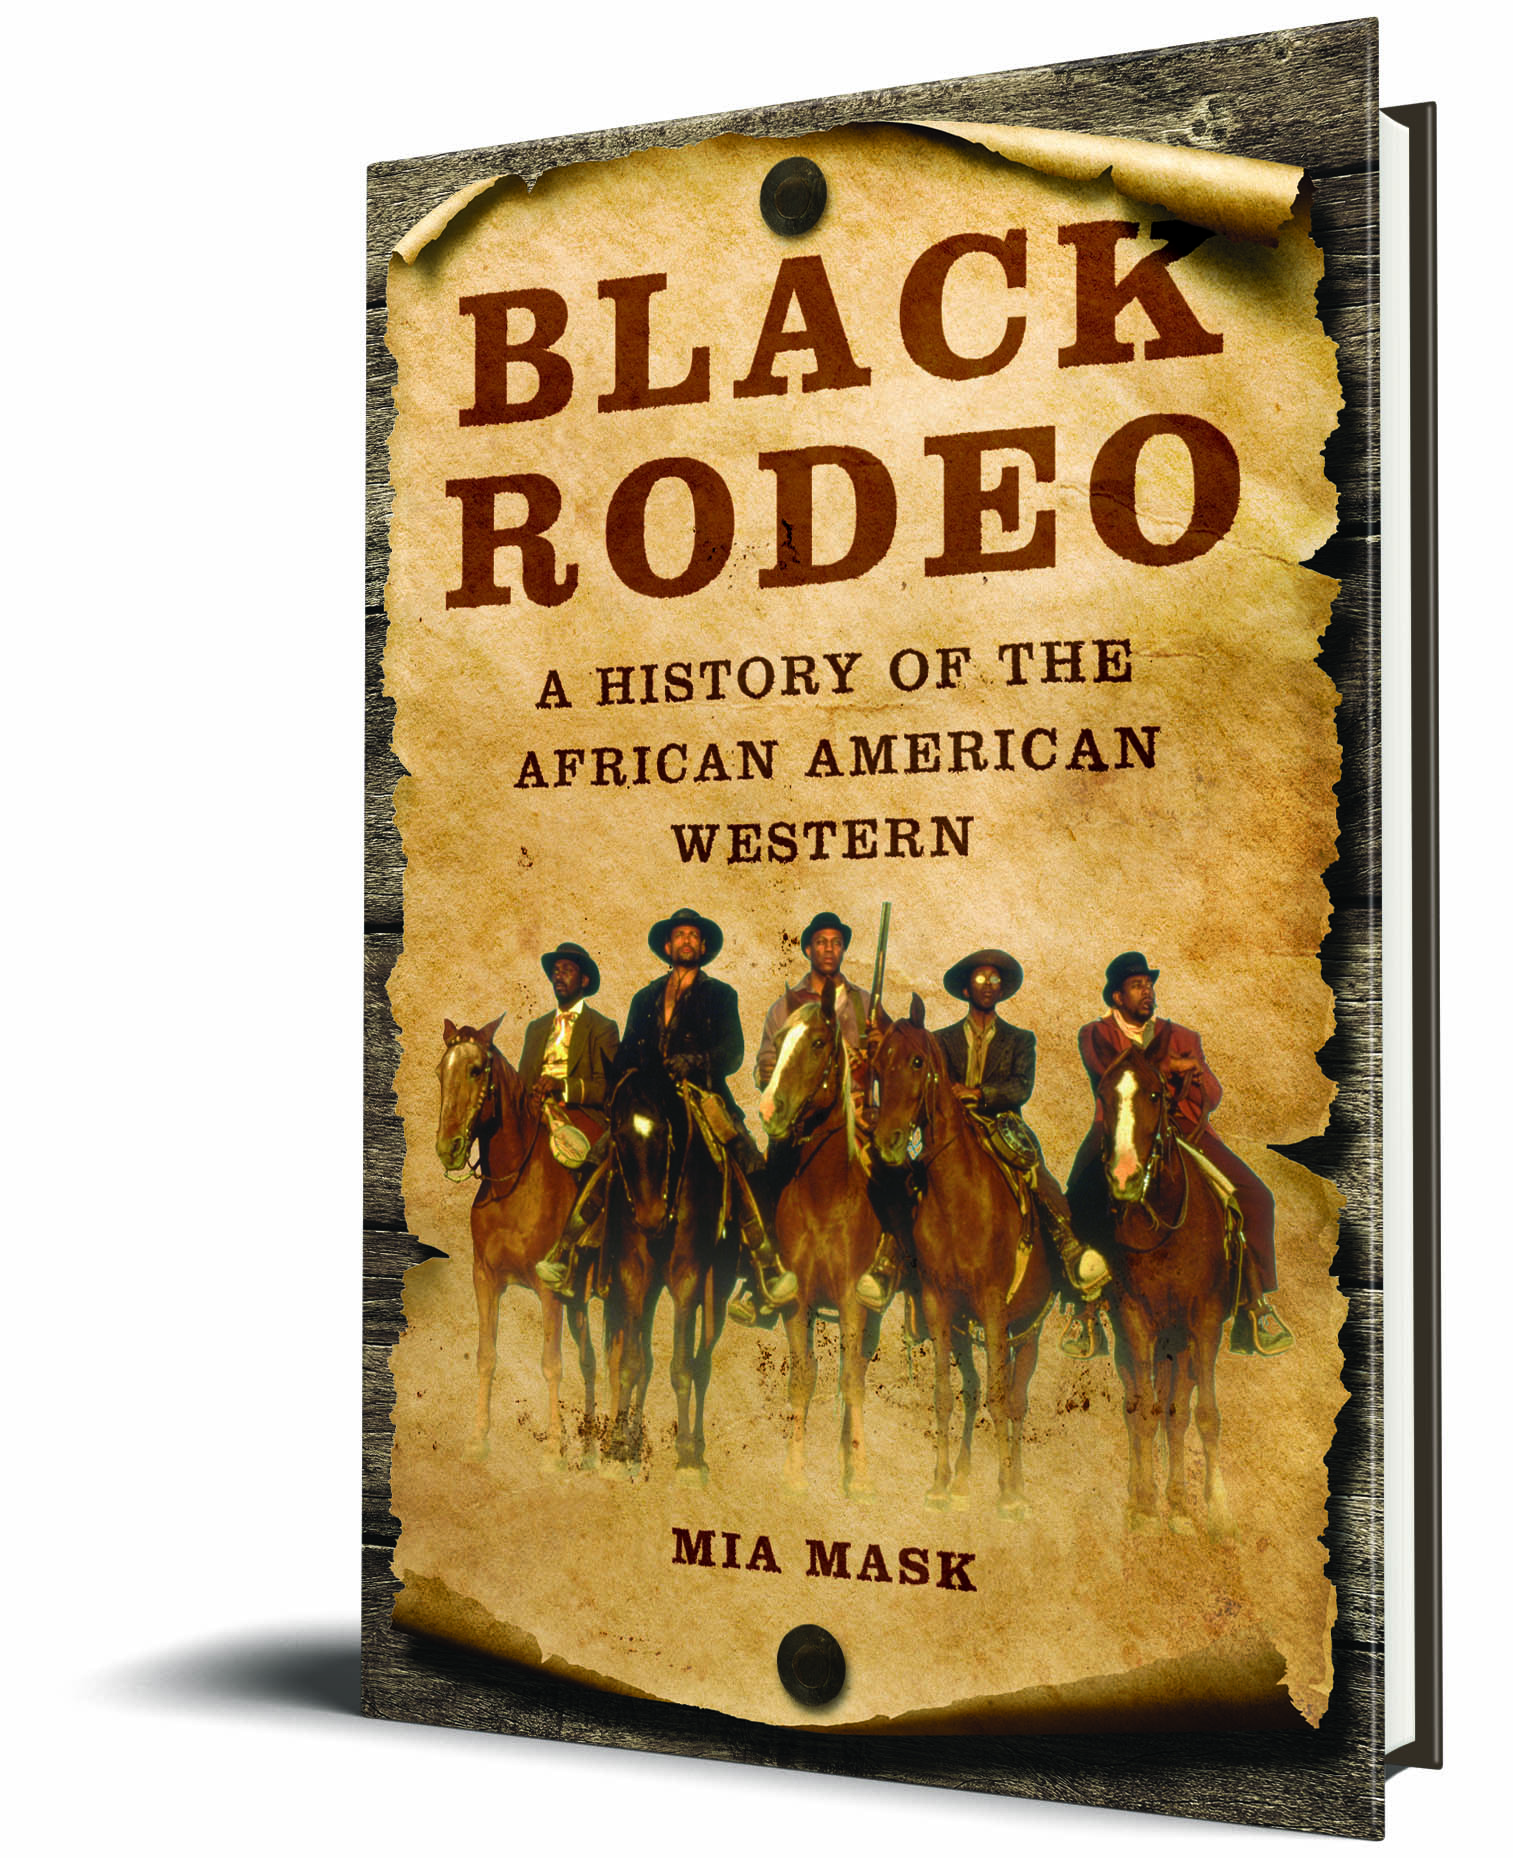 The cover of the book Black Rodeo: A History of the African American Western by Mia Mask, featuring five Black men on horseback.